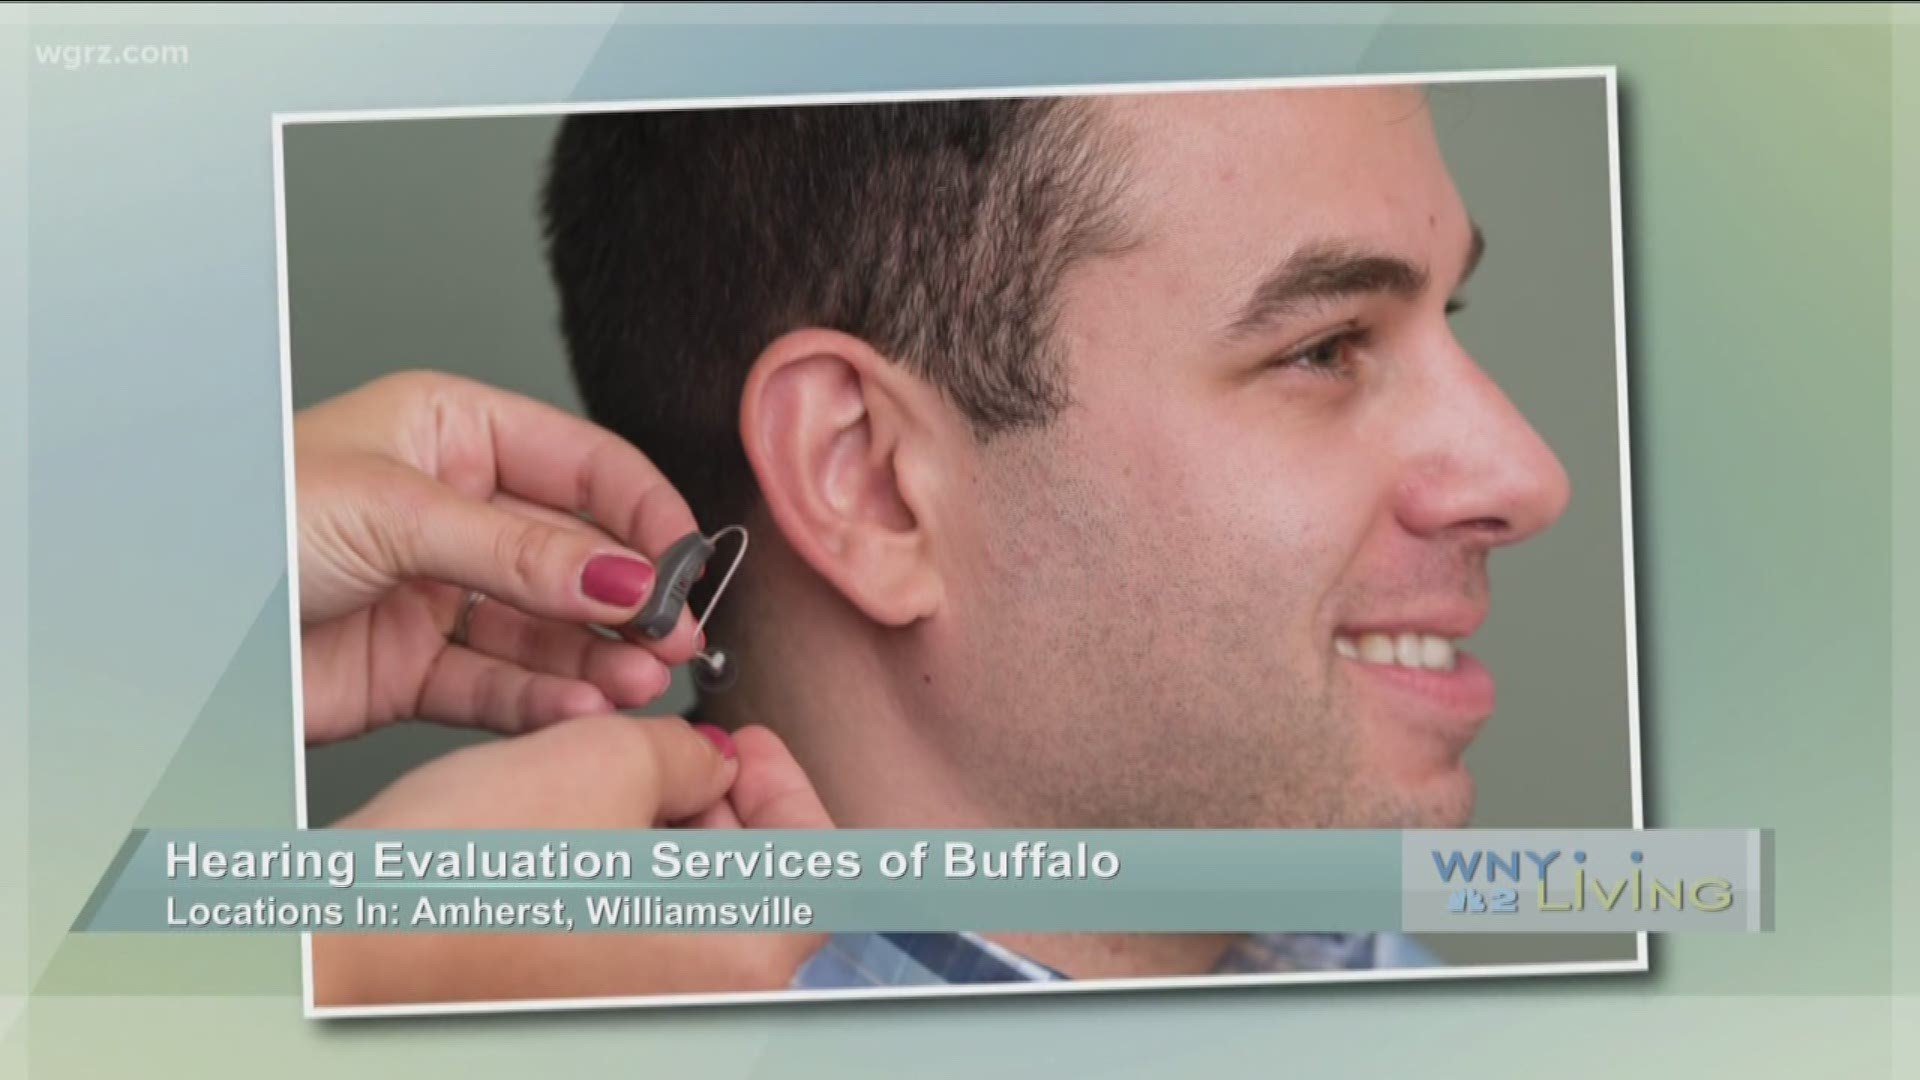 WNY Living - March 25 - Hearing Evaluation Services of Buffalo (SPONSORED CONTENT)